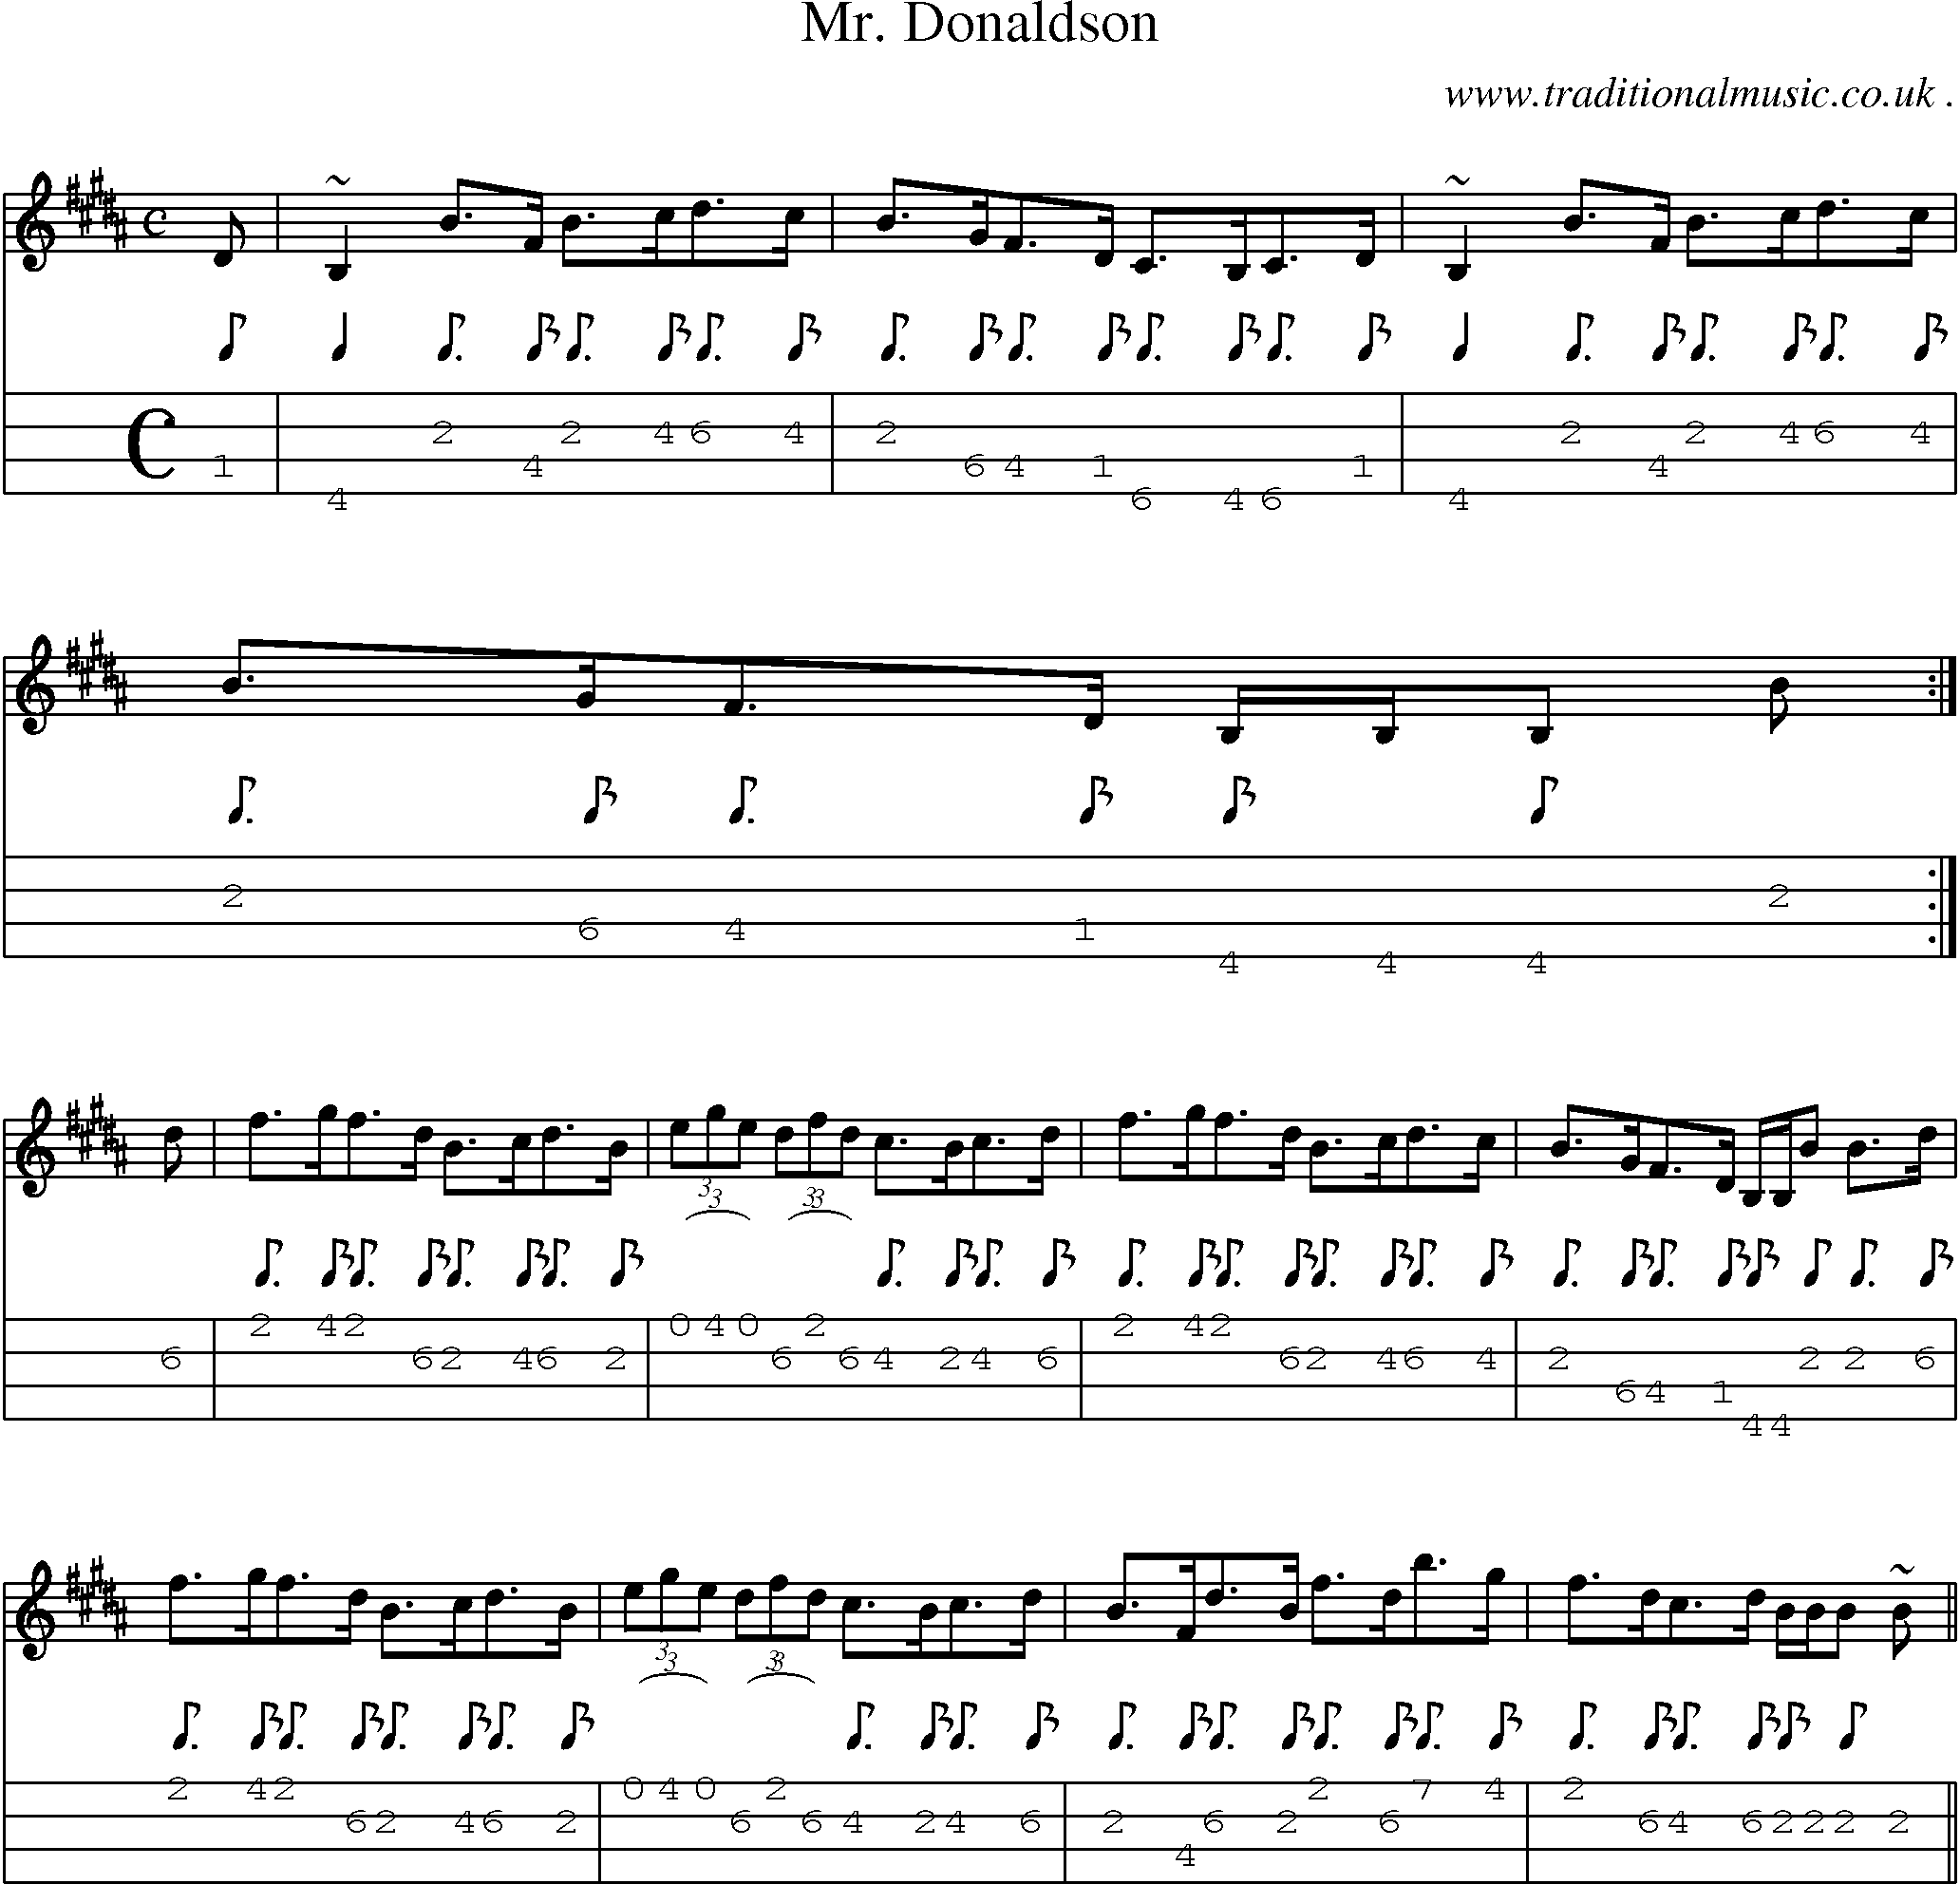 Sheet-music  score, Chords and Mandolin Tabs for Mr Donaldson